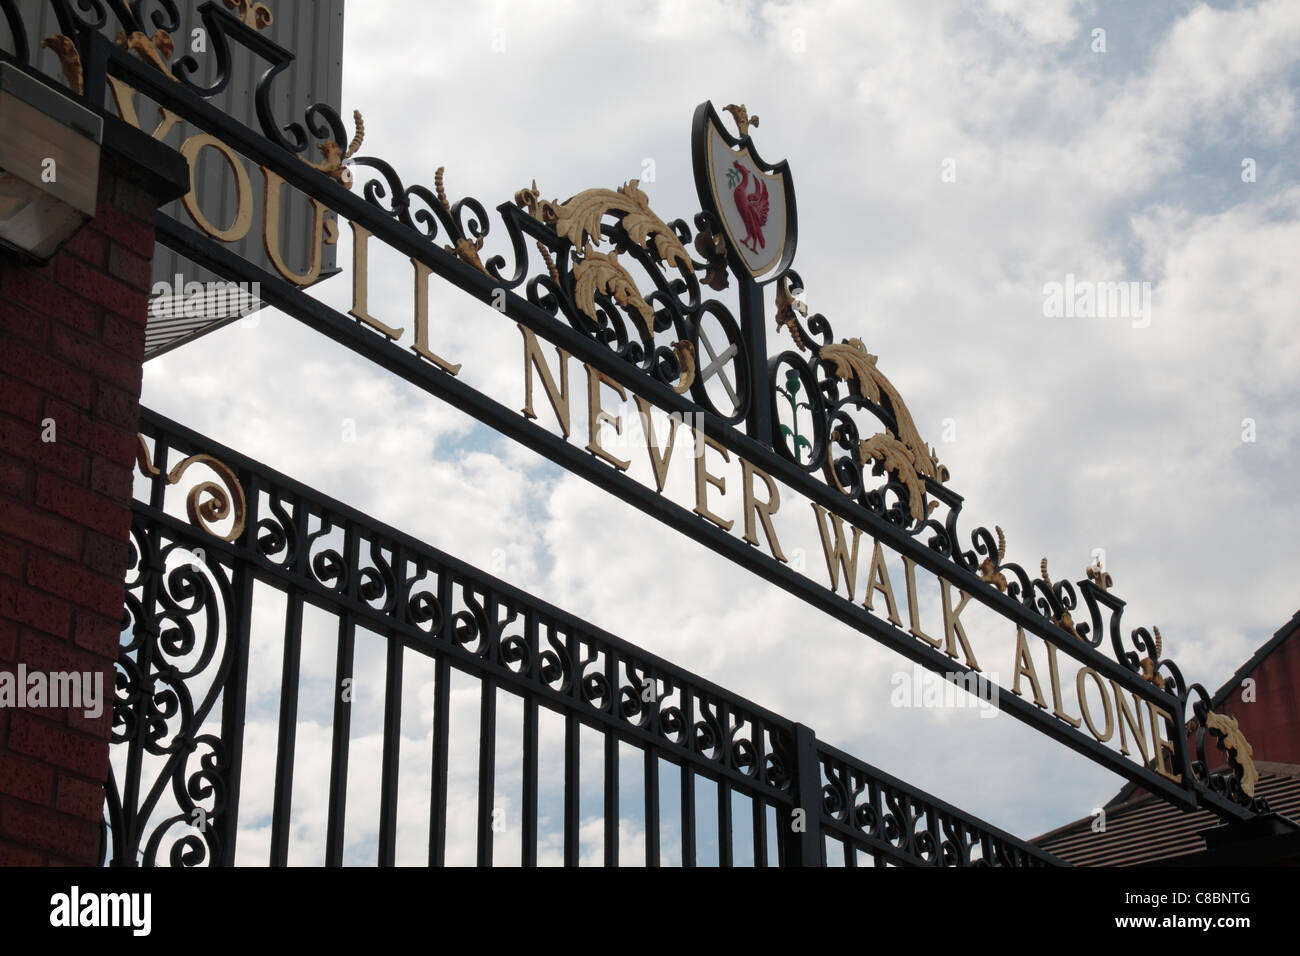 The 'You'll Never Walk Alone' gates on the Anfield Road entrance of Anfield, the home ground of Liverpool Football club. Stock Photo